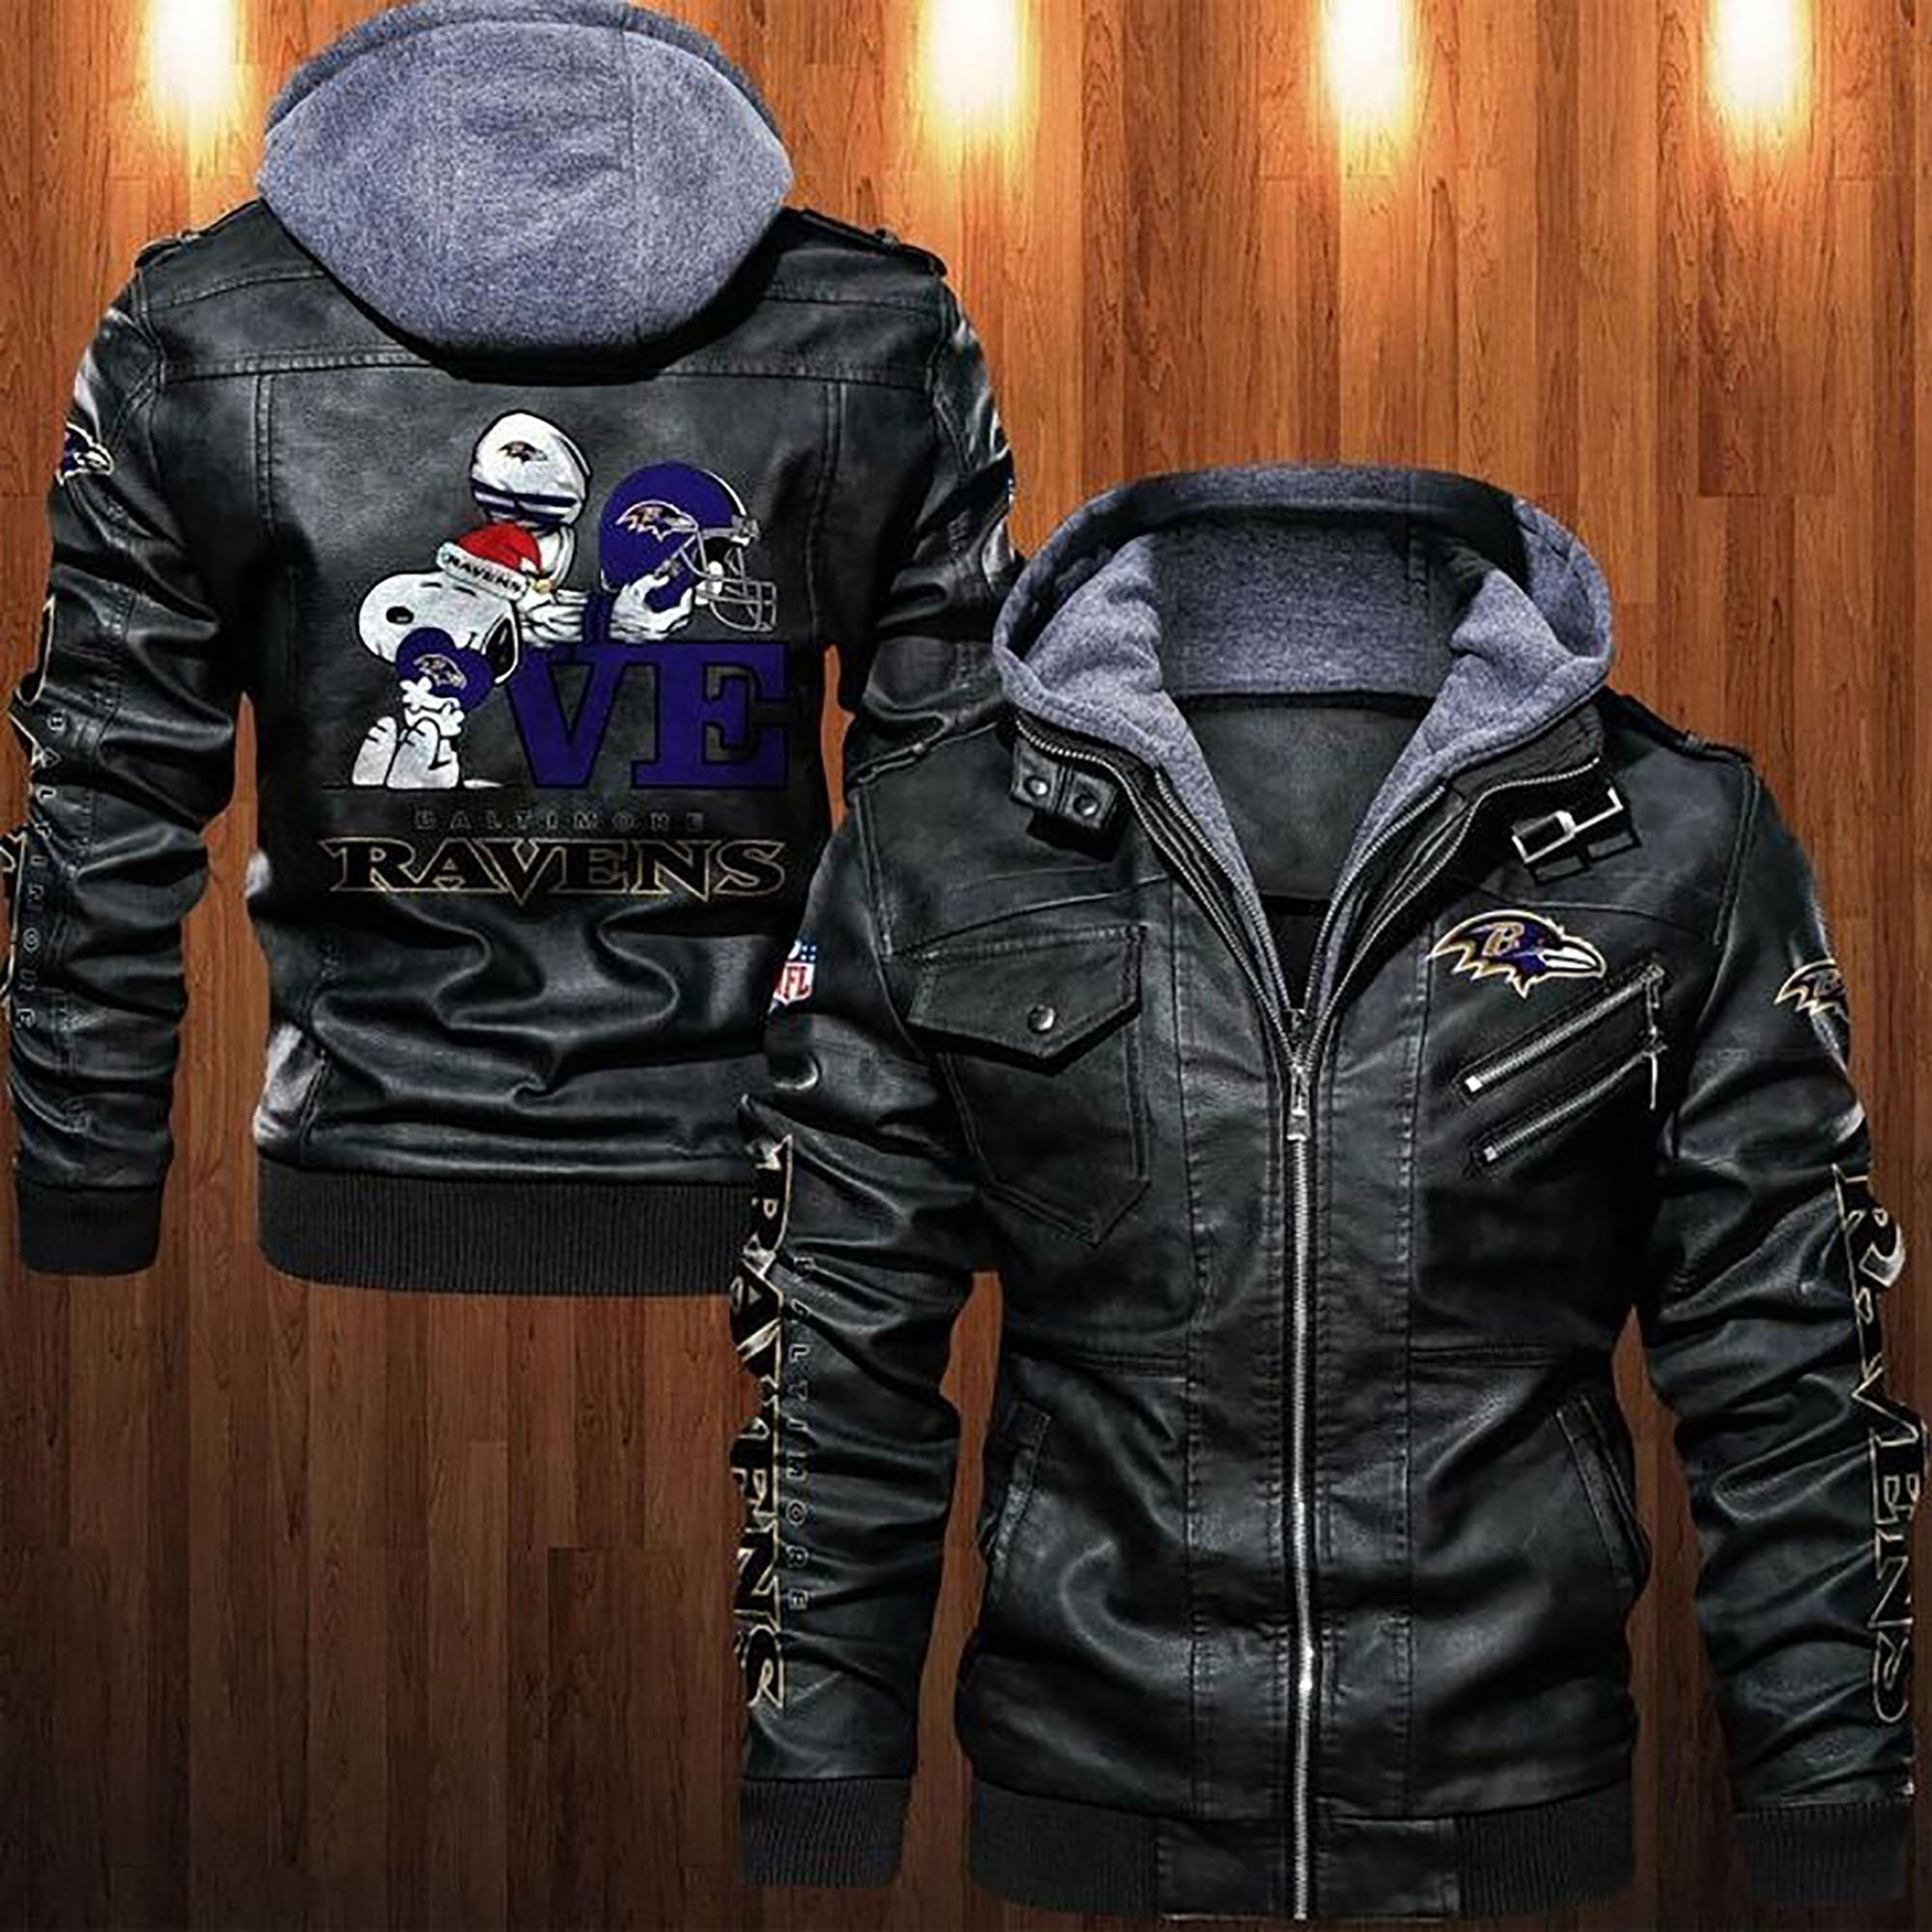 These Amazing Leather Jacket will add to the appeal of your outfit 92